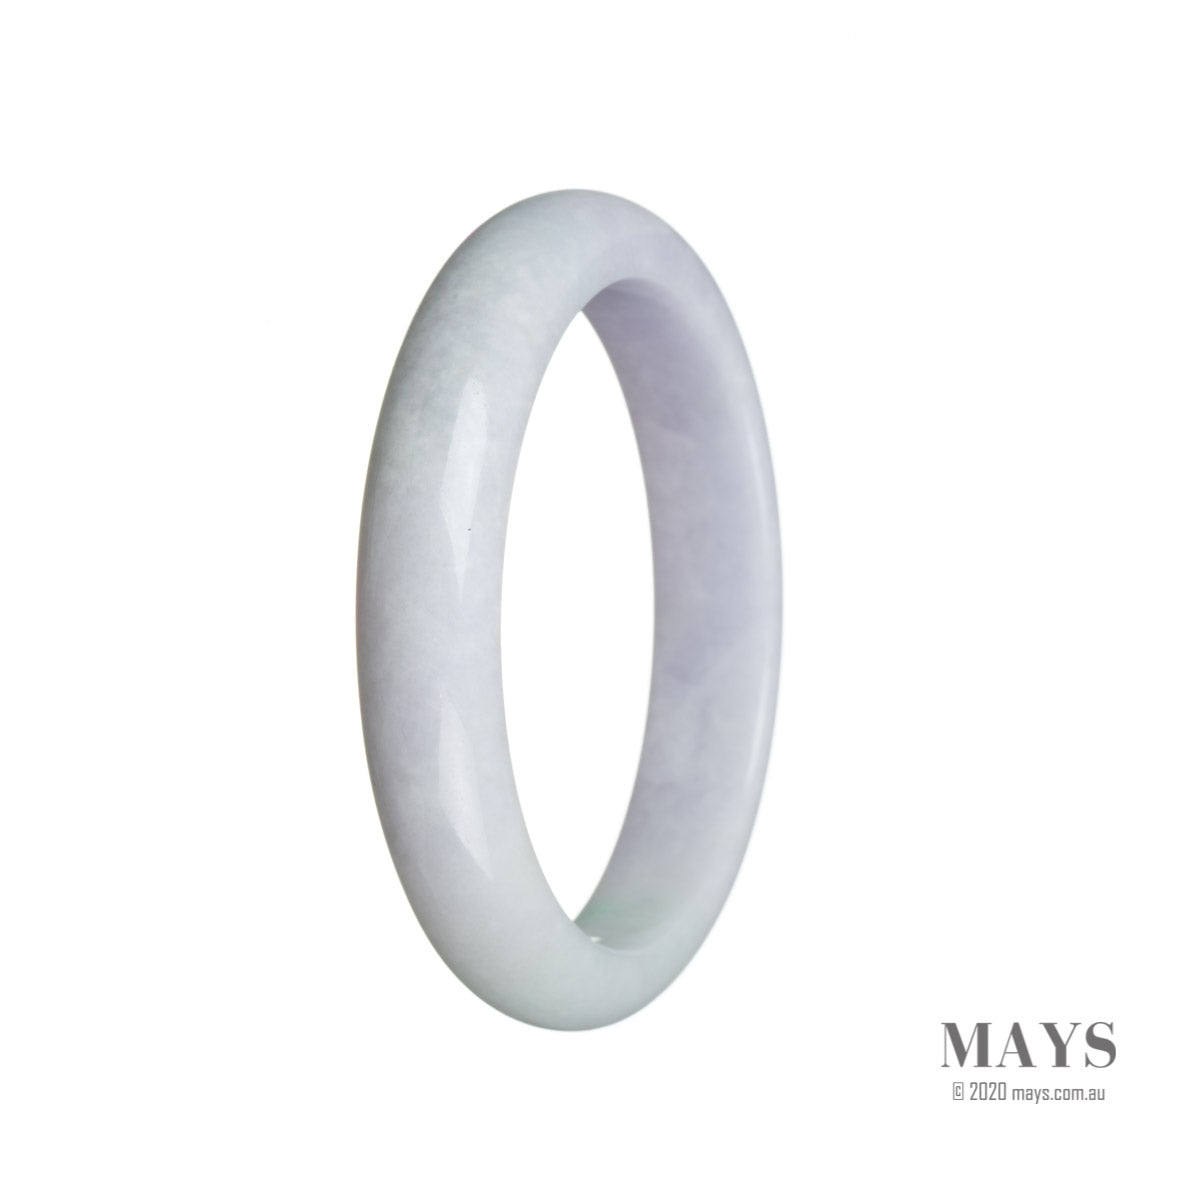 A beautiful pale lavender and green Burma Jade bangle with a semi-round shape, untreated for a natural and authentic look.